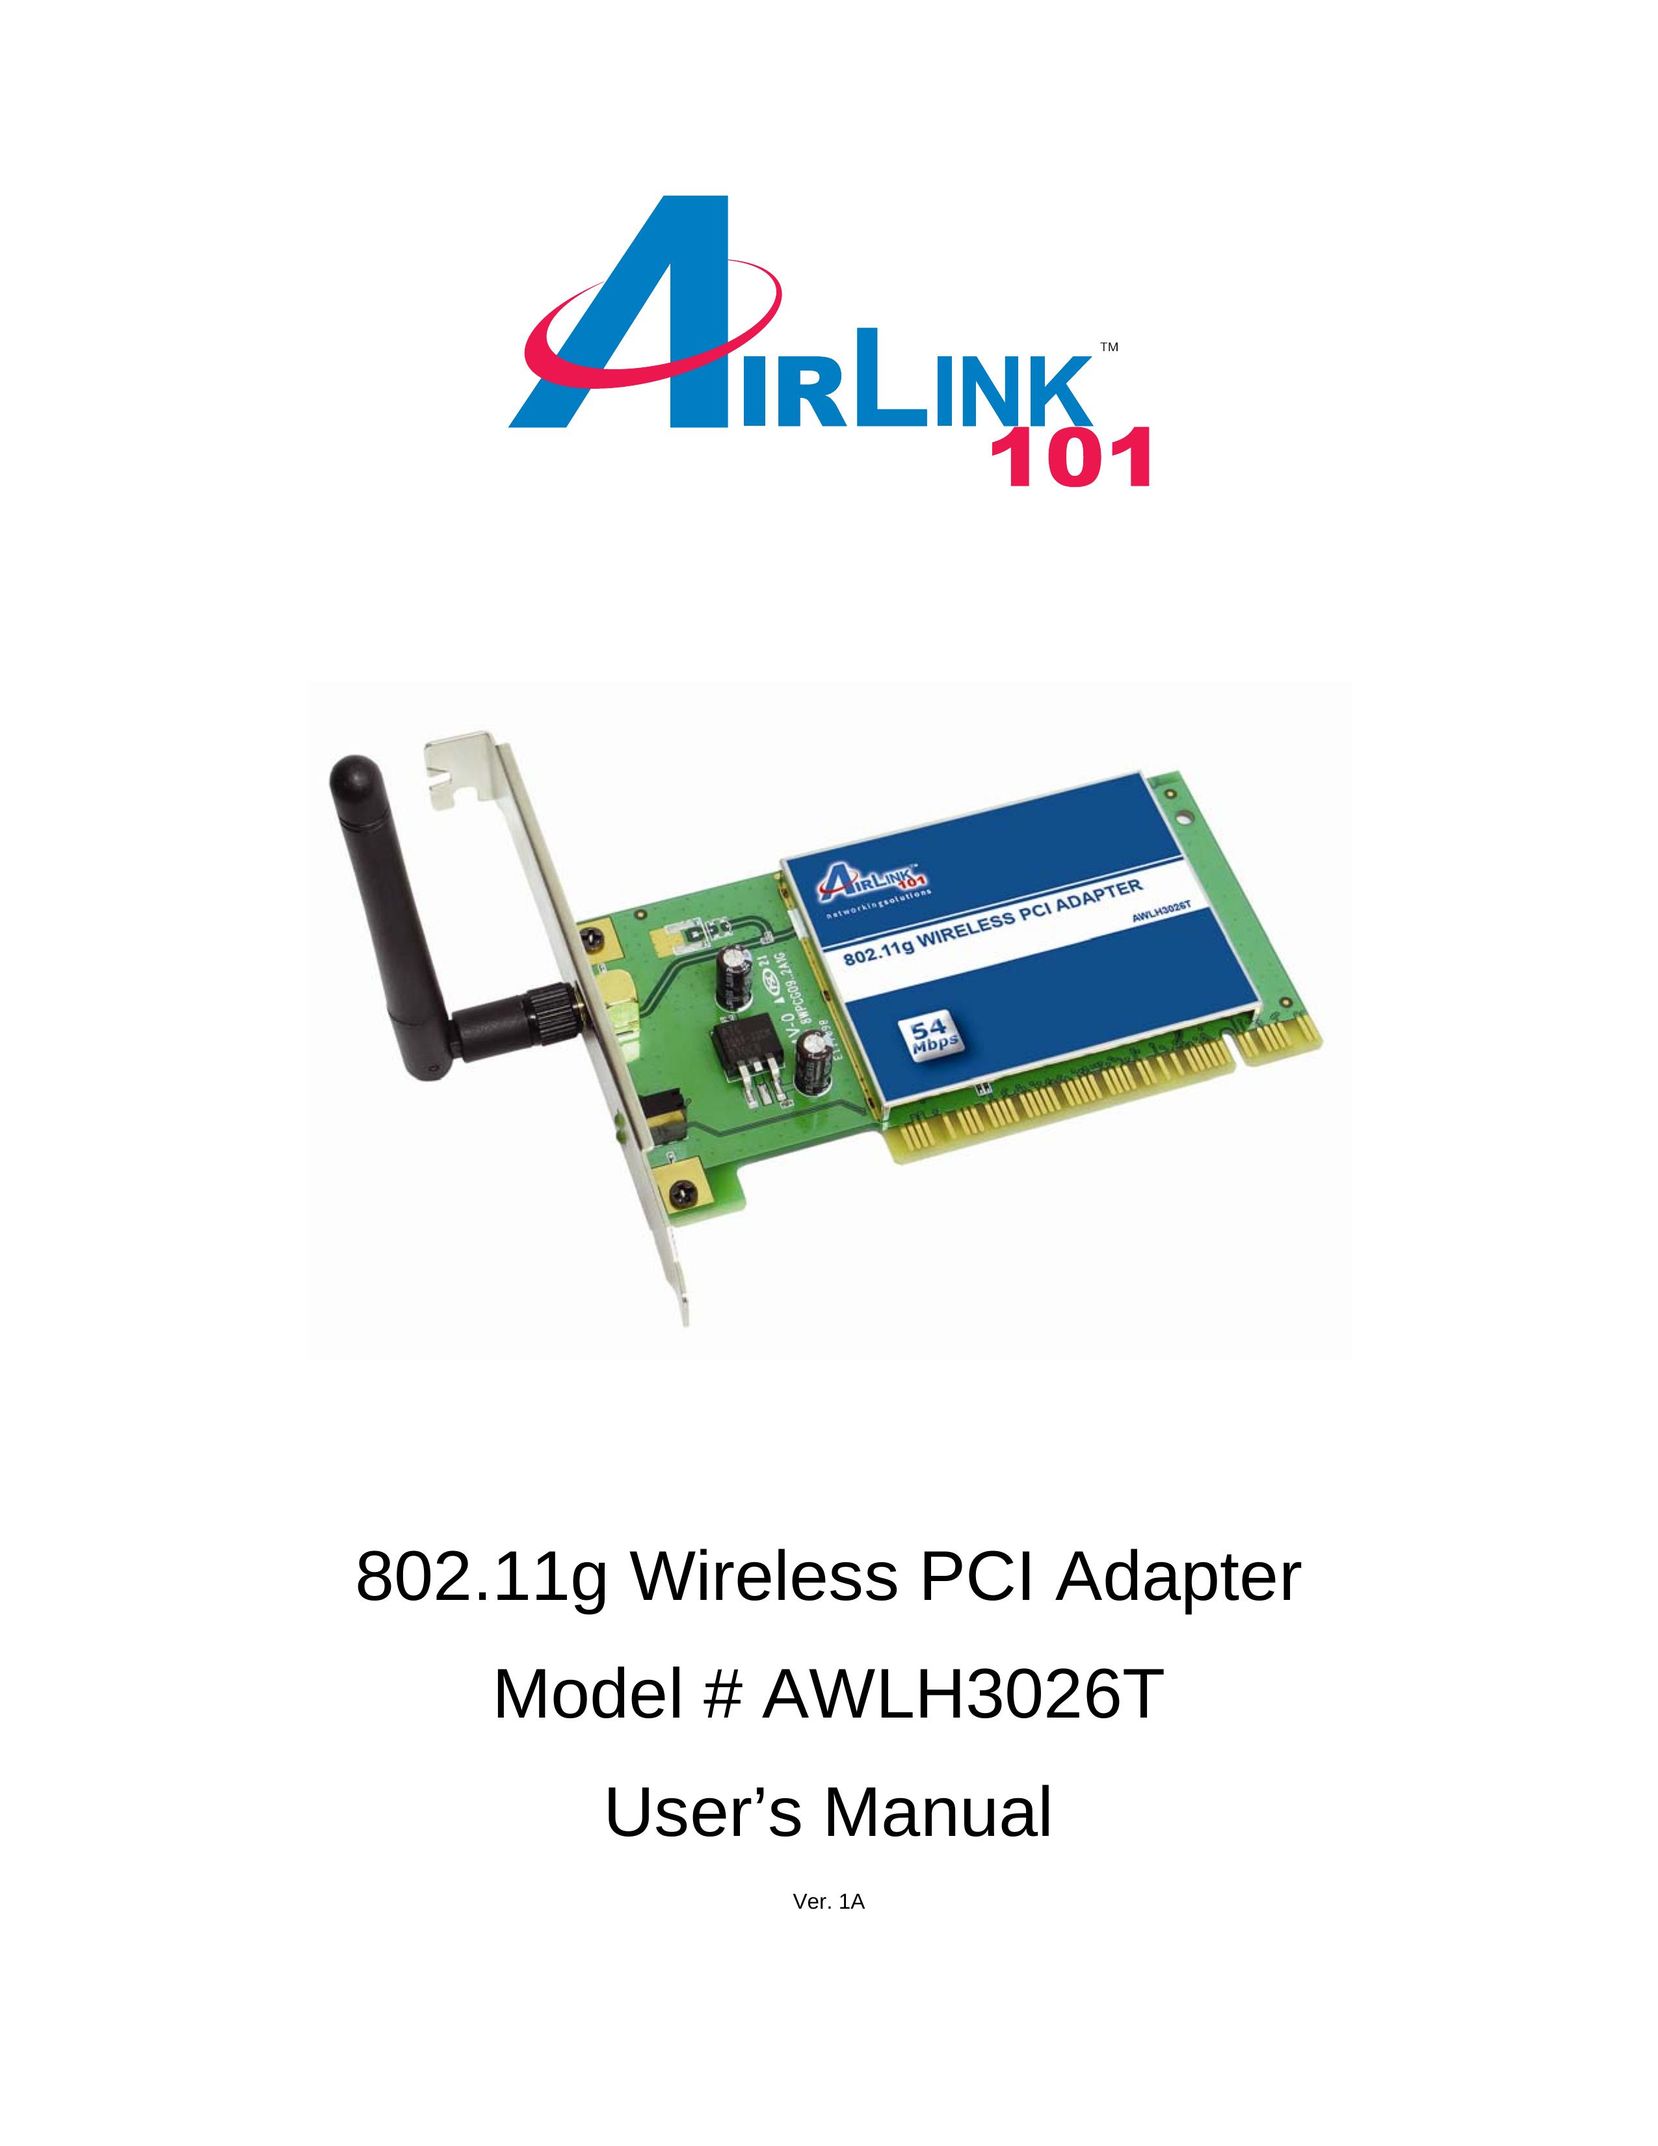 Airlink101 AWLH3026T Network Card User Manual